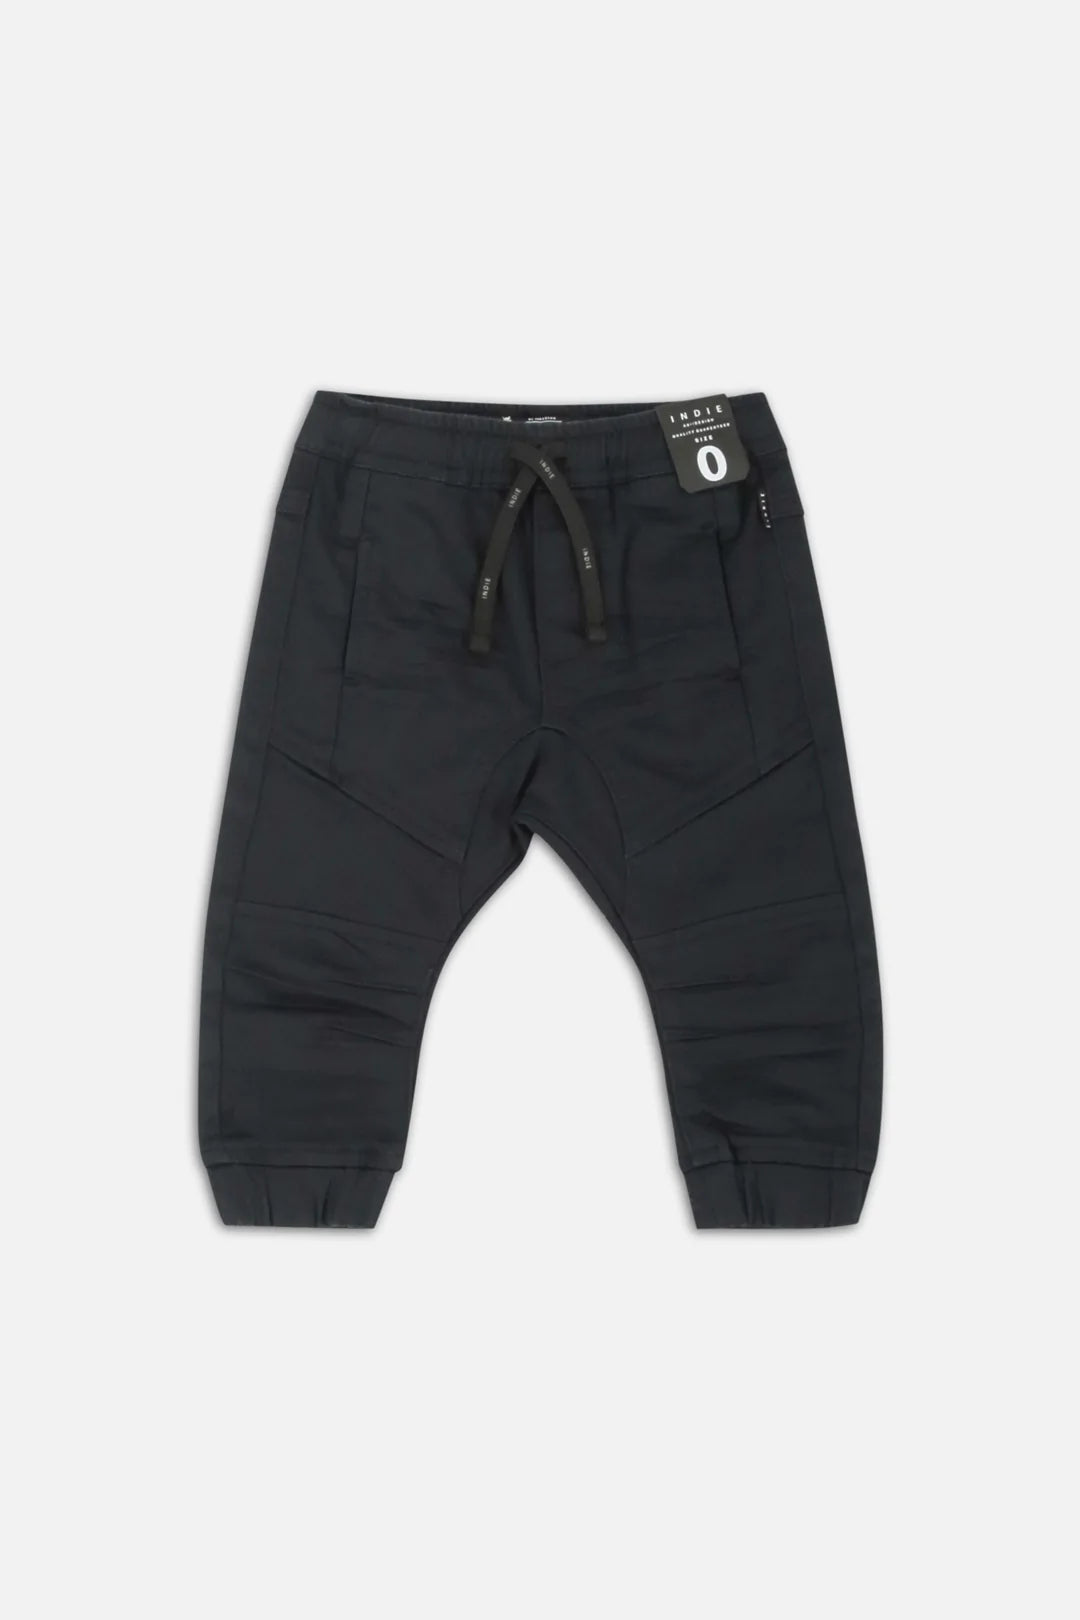 Indie Kids Arched Drifter Pant - Raw (000-2 Years)